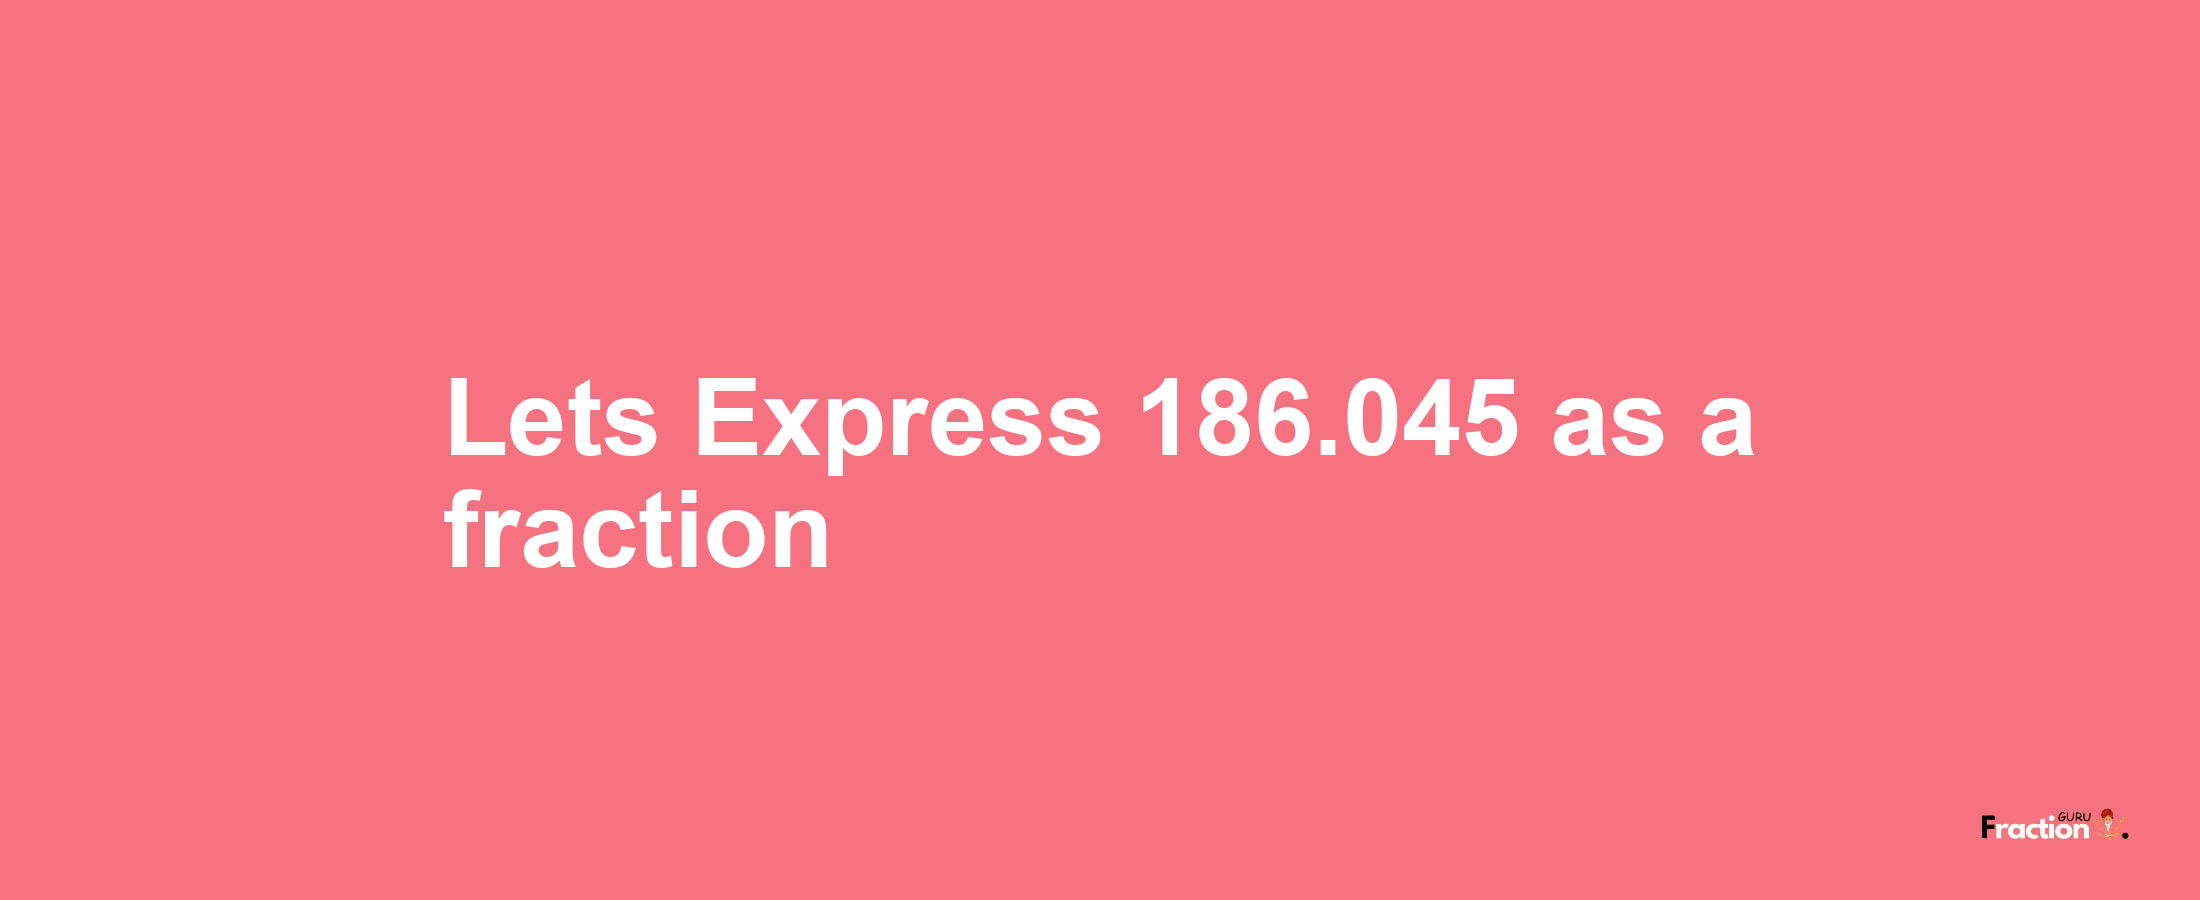 Lets Express 186.045 as afraction